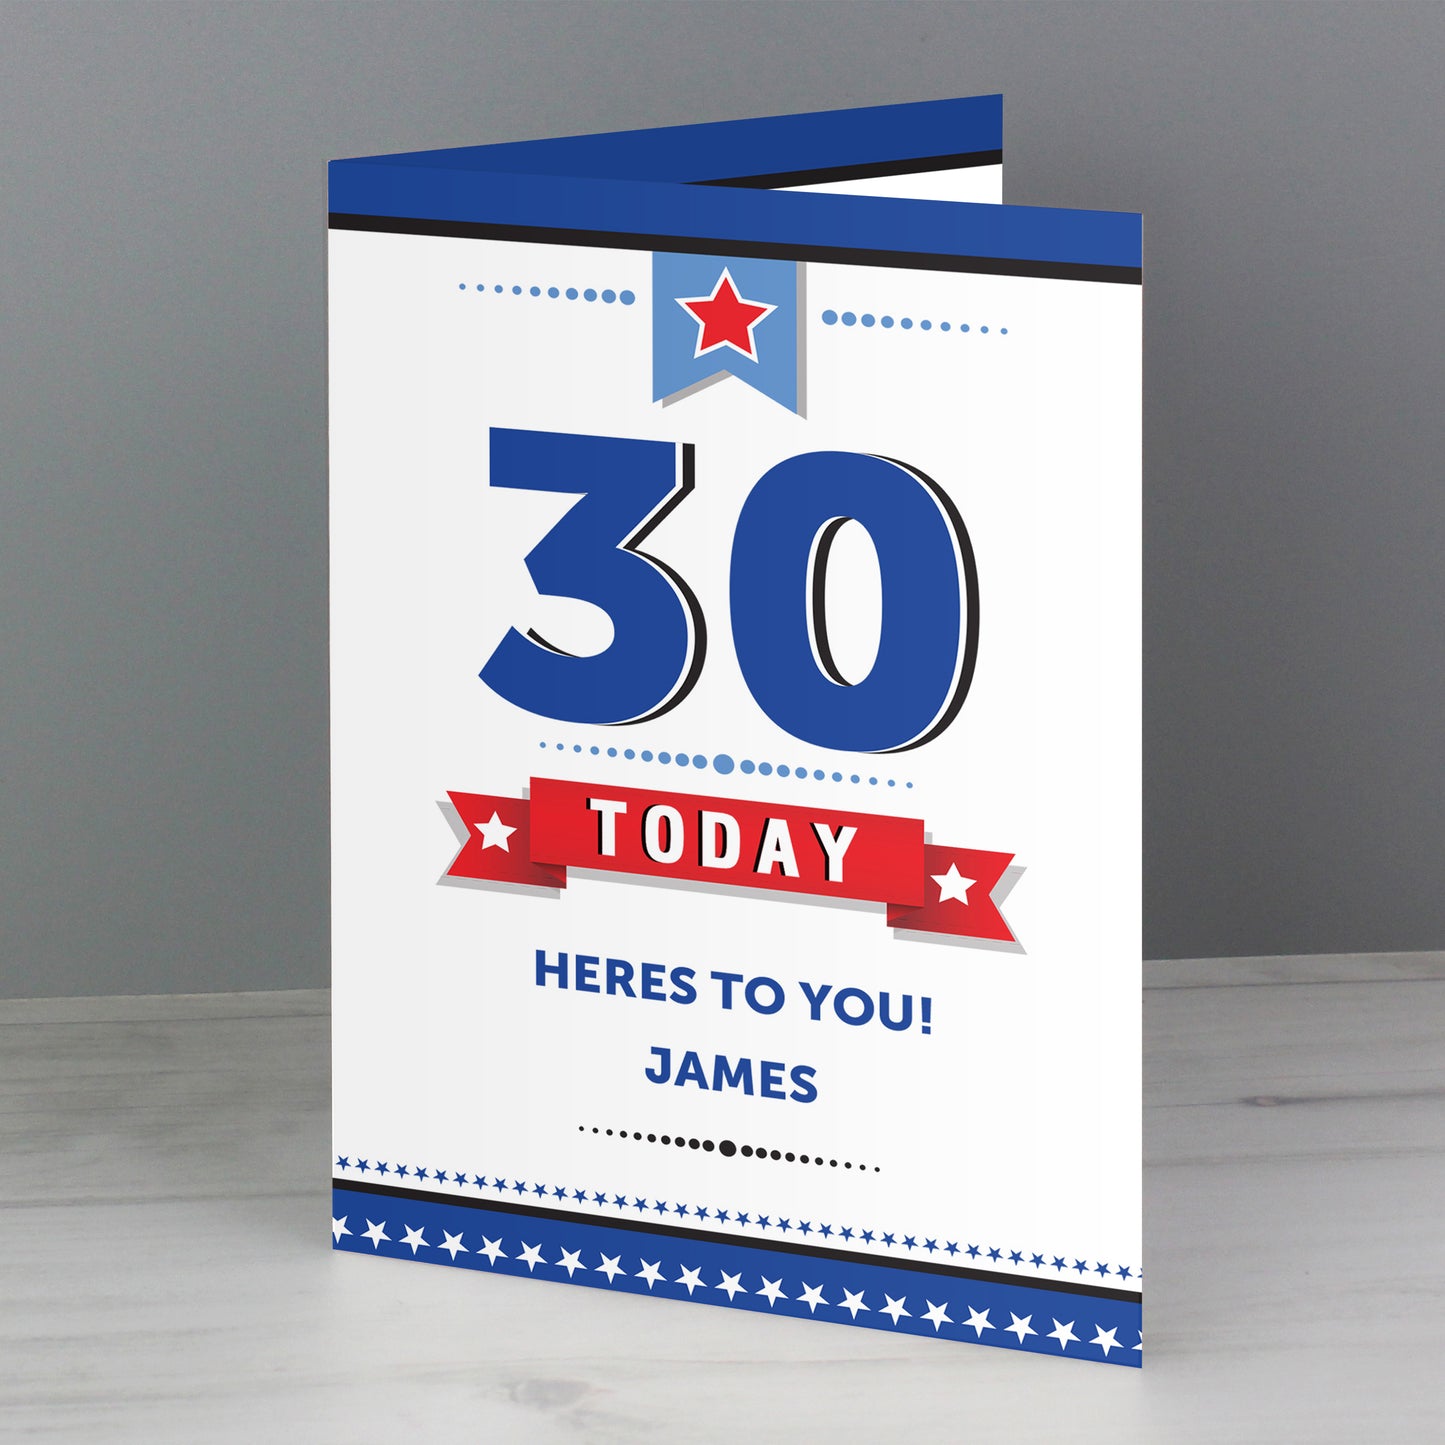 Personalised Birthday Star Card Add Any Age & Name - Personalise It!